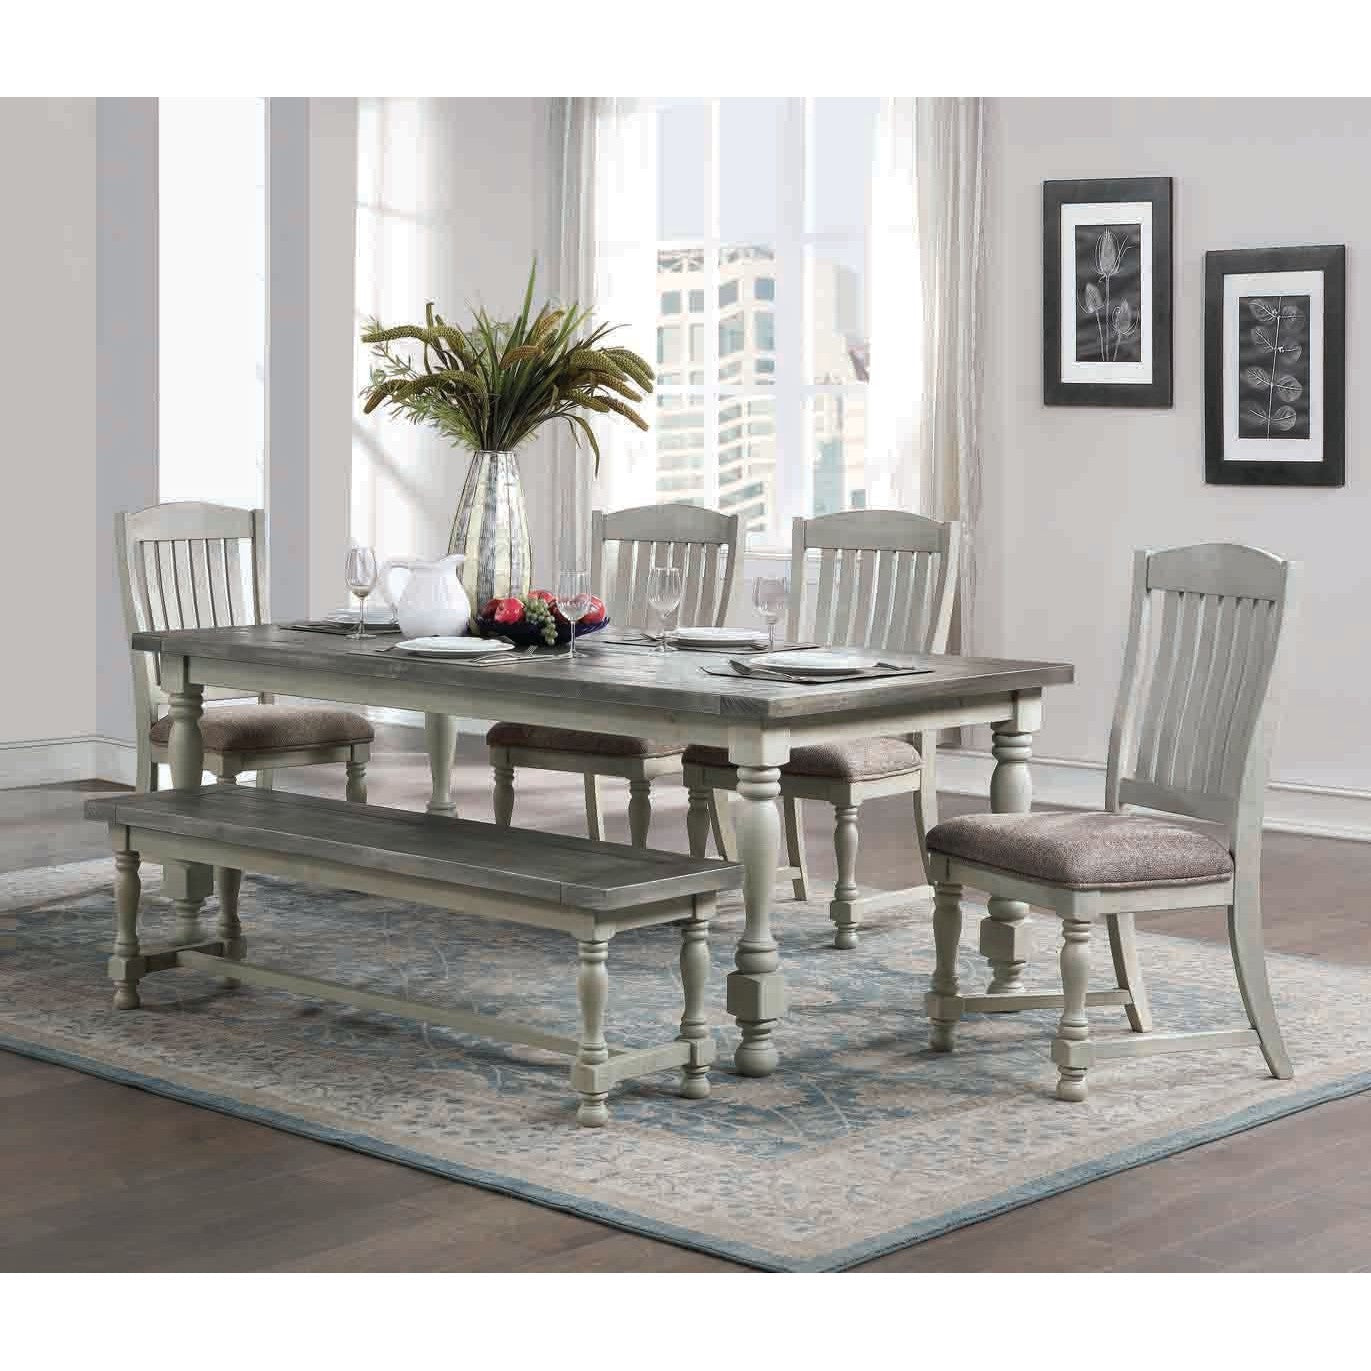 Valencia Two Tone Driftwood/Taupe  6 or 7 Piece Dining Set with 78" Table - New!